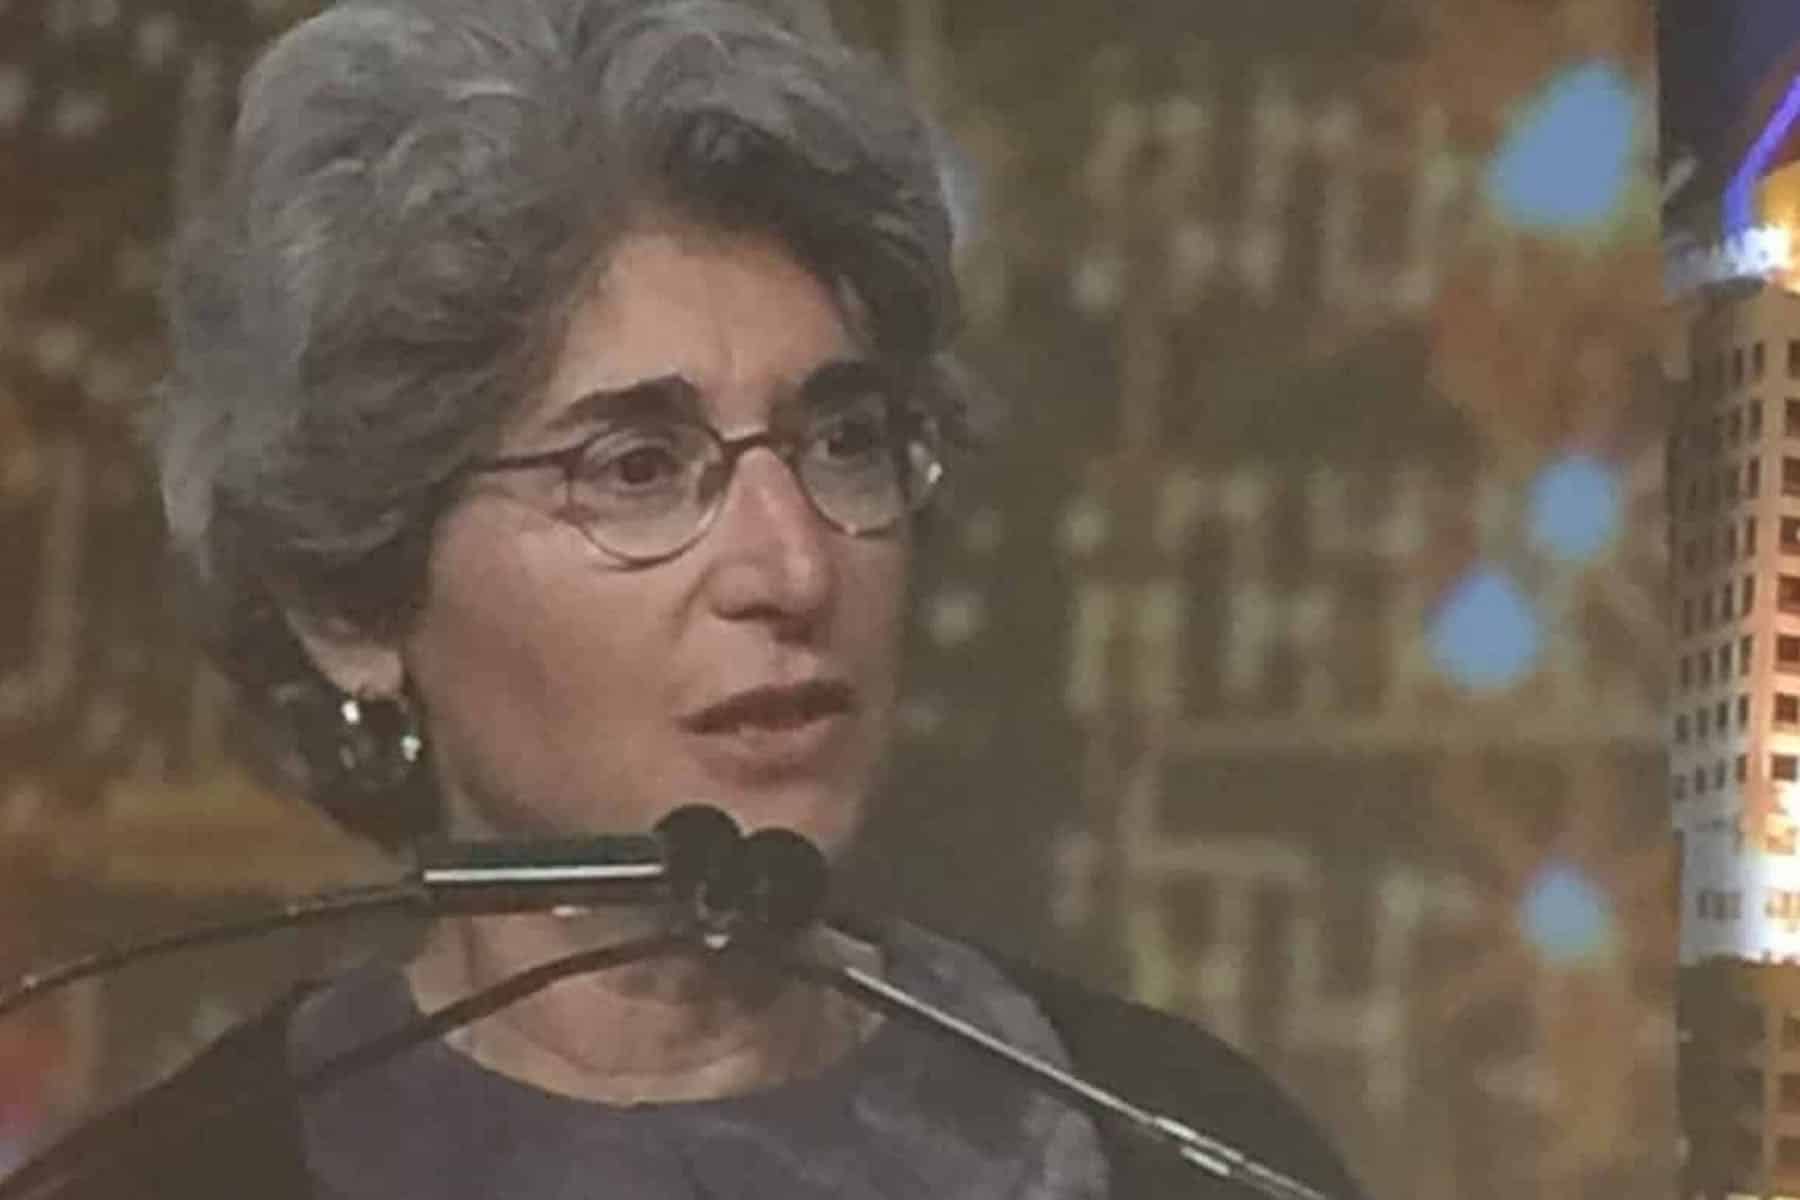 A woman with curly salt and pepper hair is standing at a podium, speaking into a microphone. She wears glasses and is being presented an award. Nancy Seidman receives AWMA award.